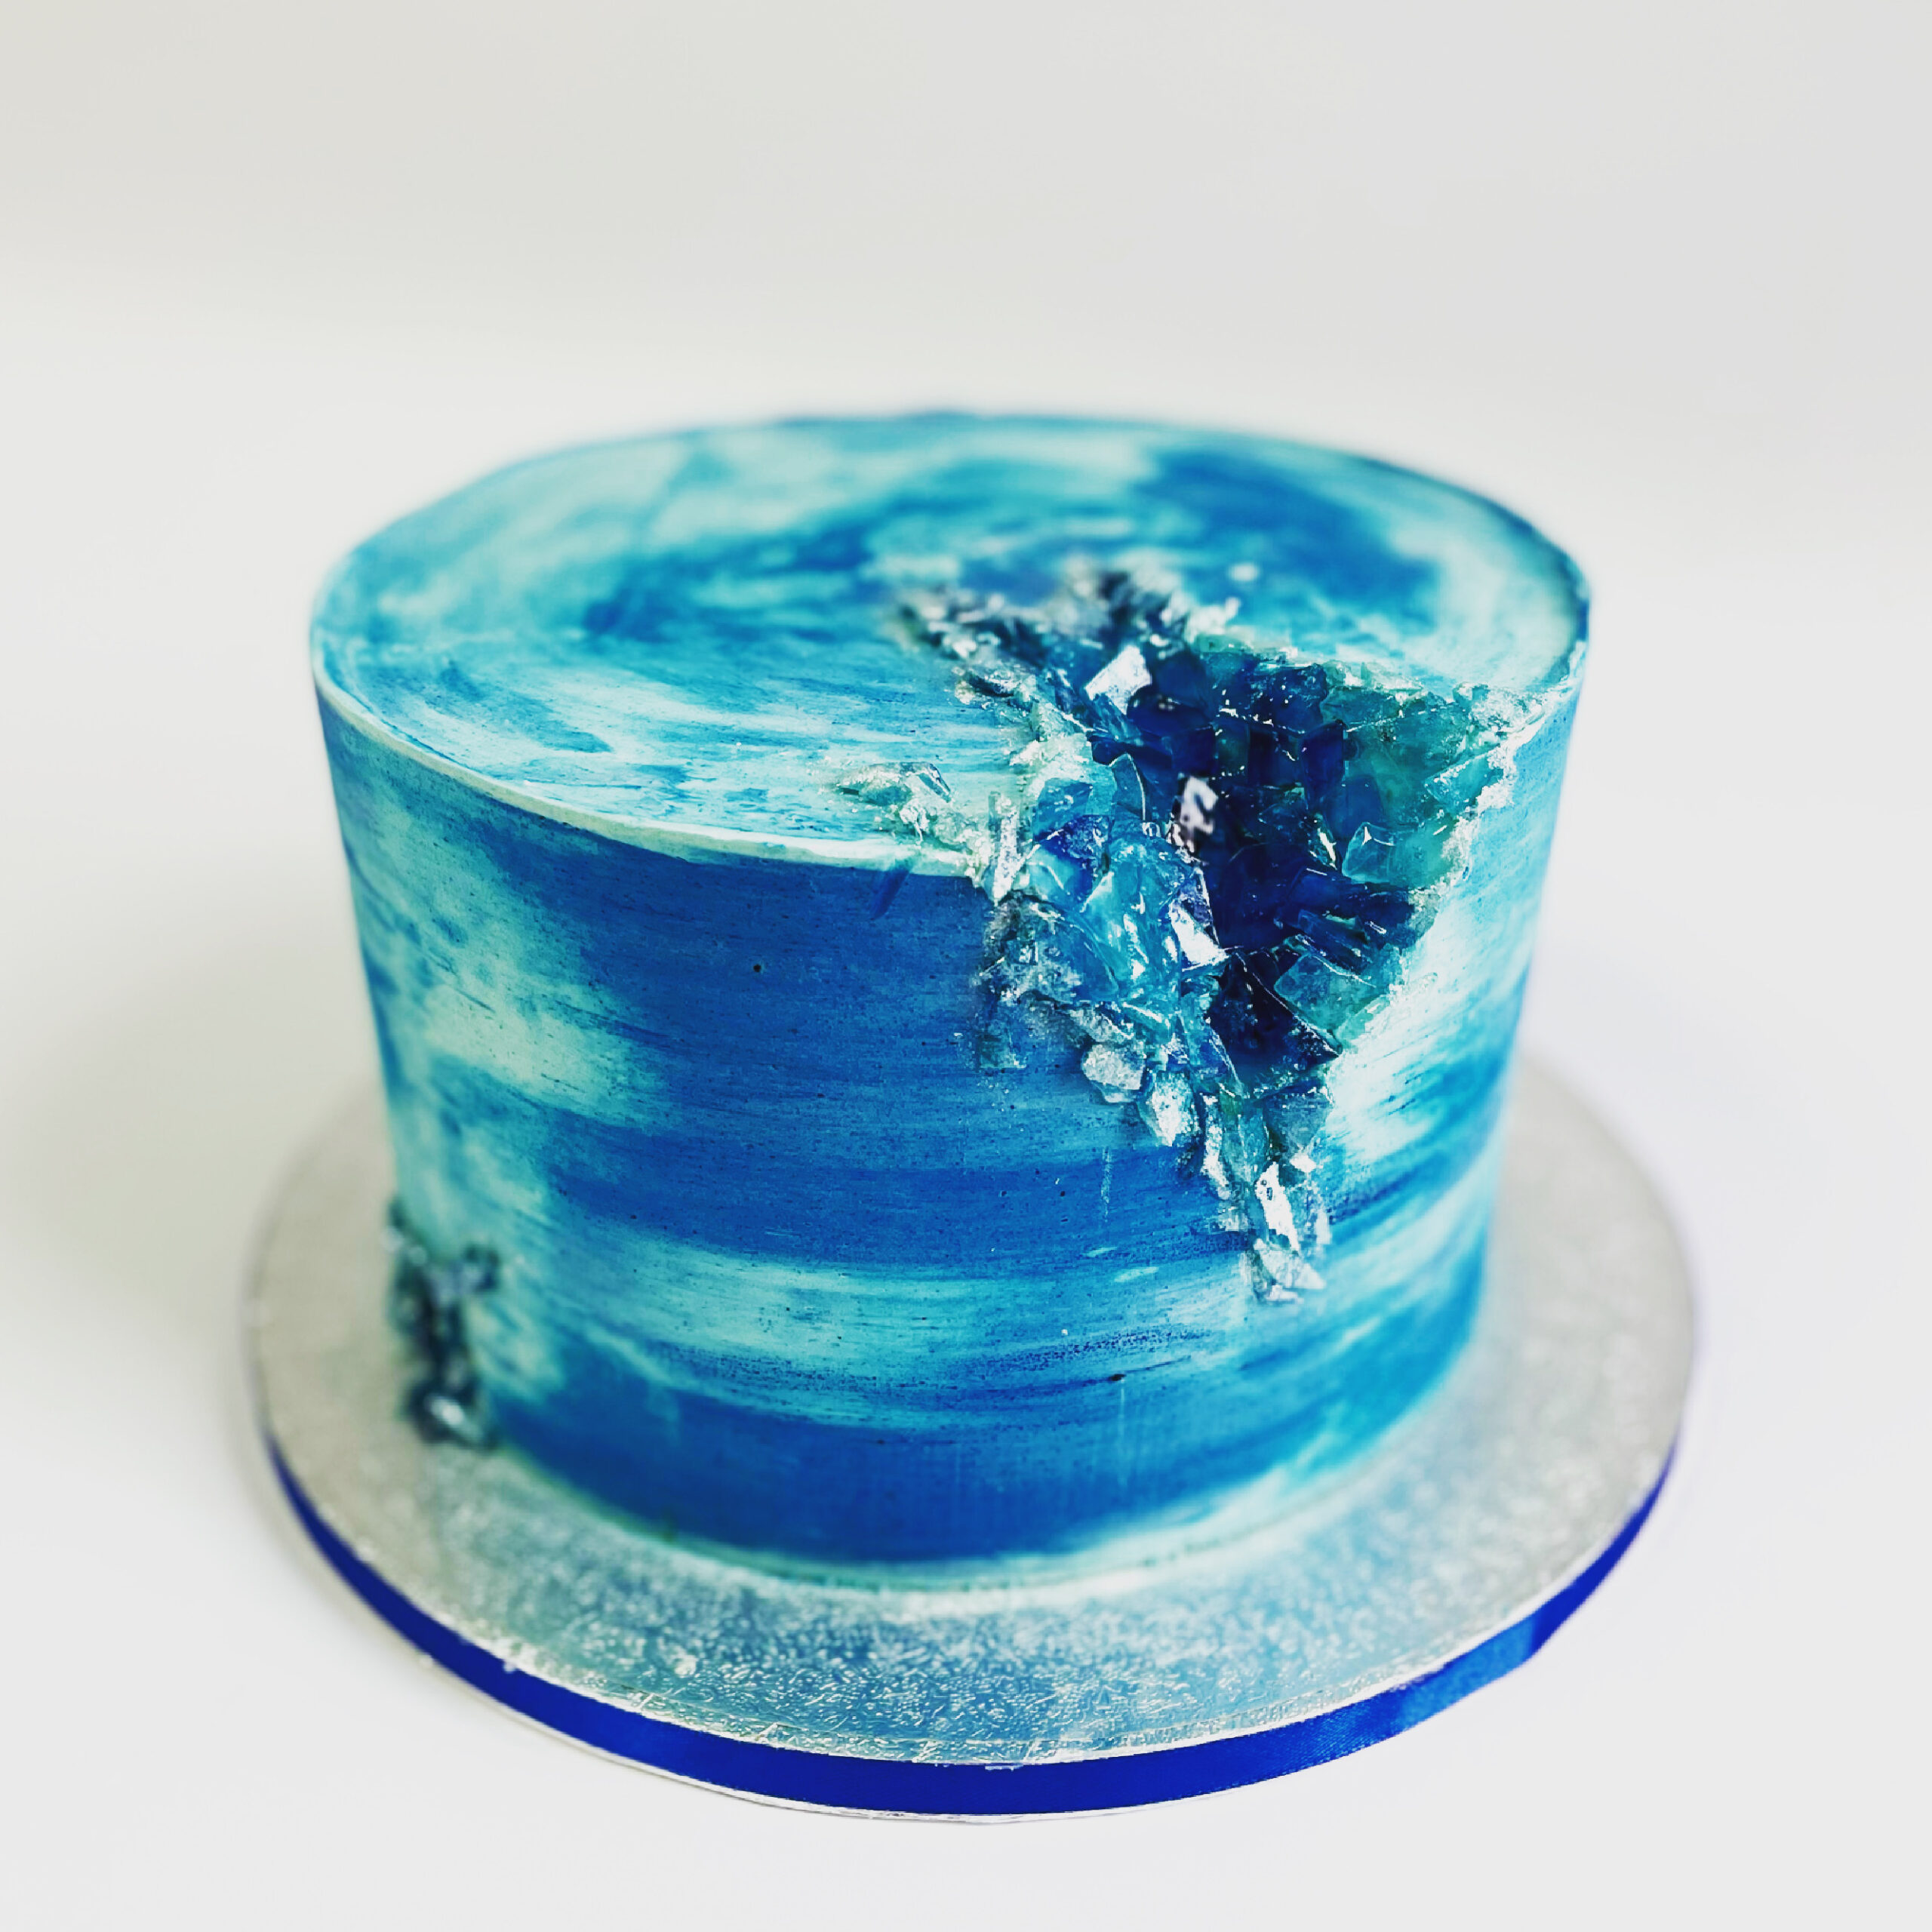 How to Make The Perfect Crystal Cake?